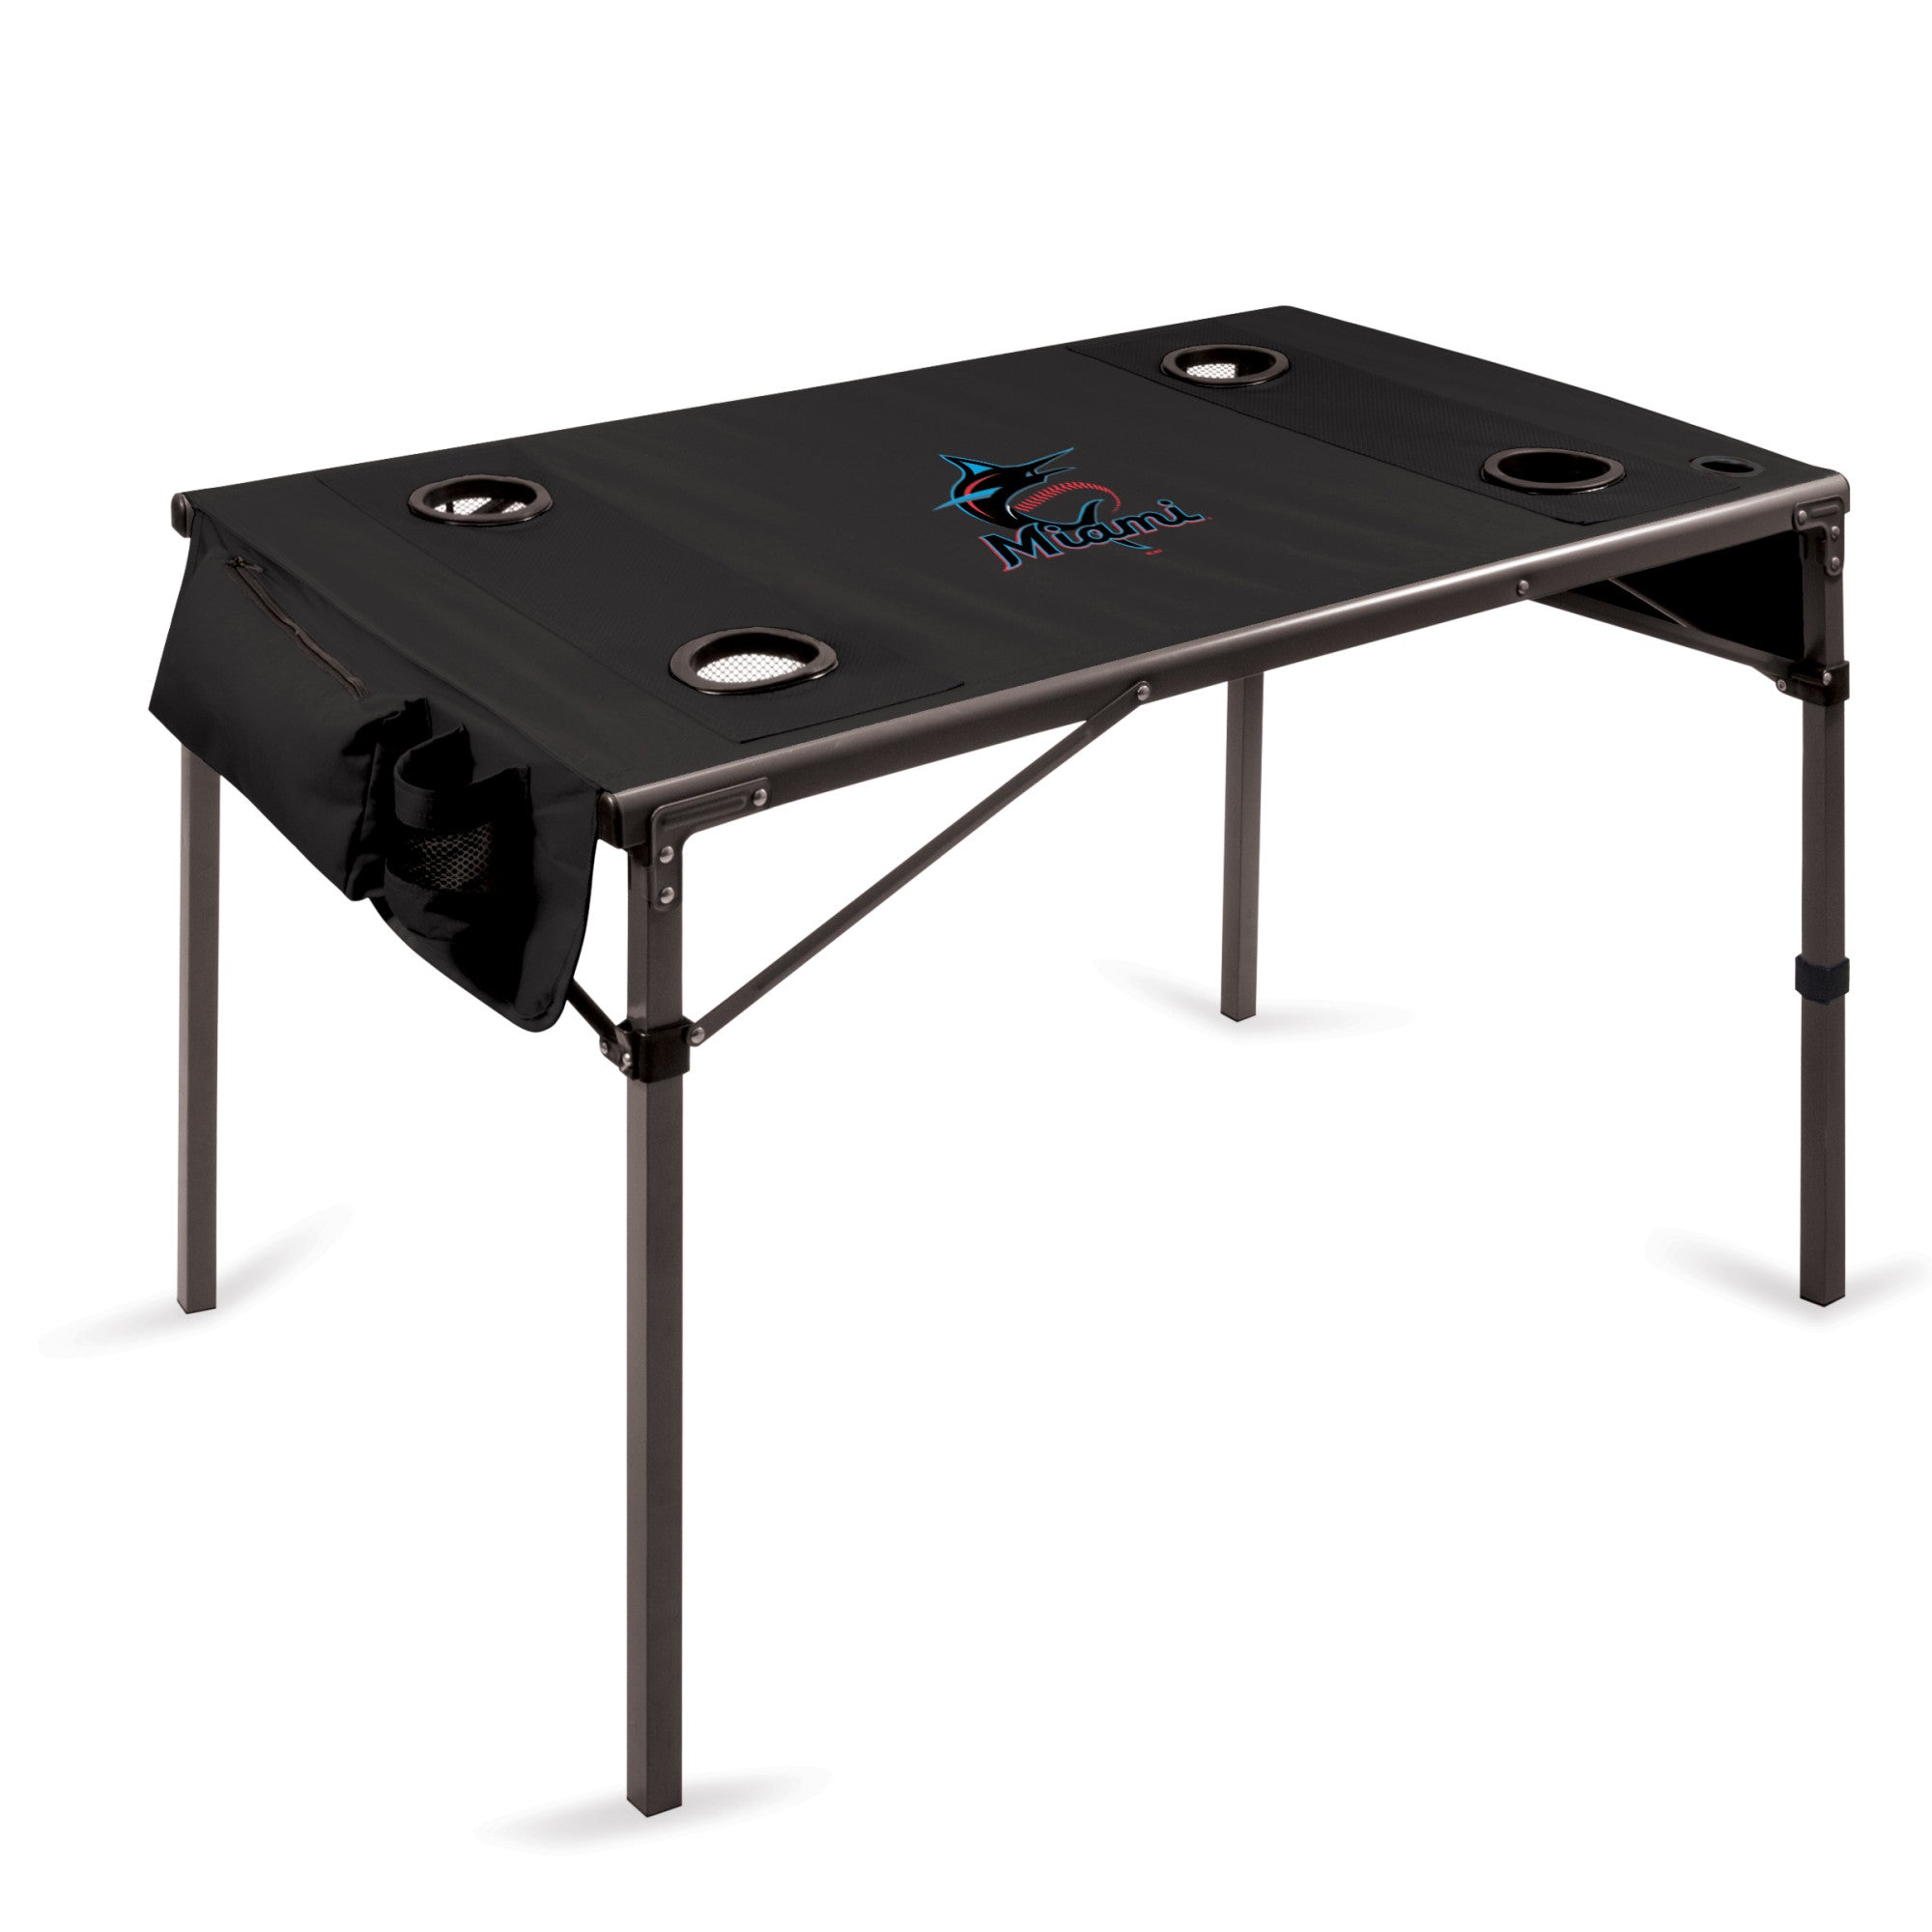 Miami Marlins - Travel Table Portable Folding Table